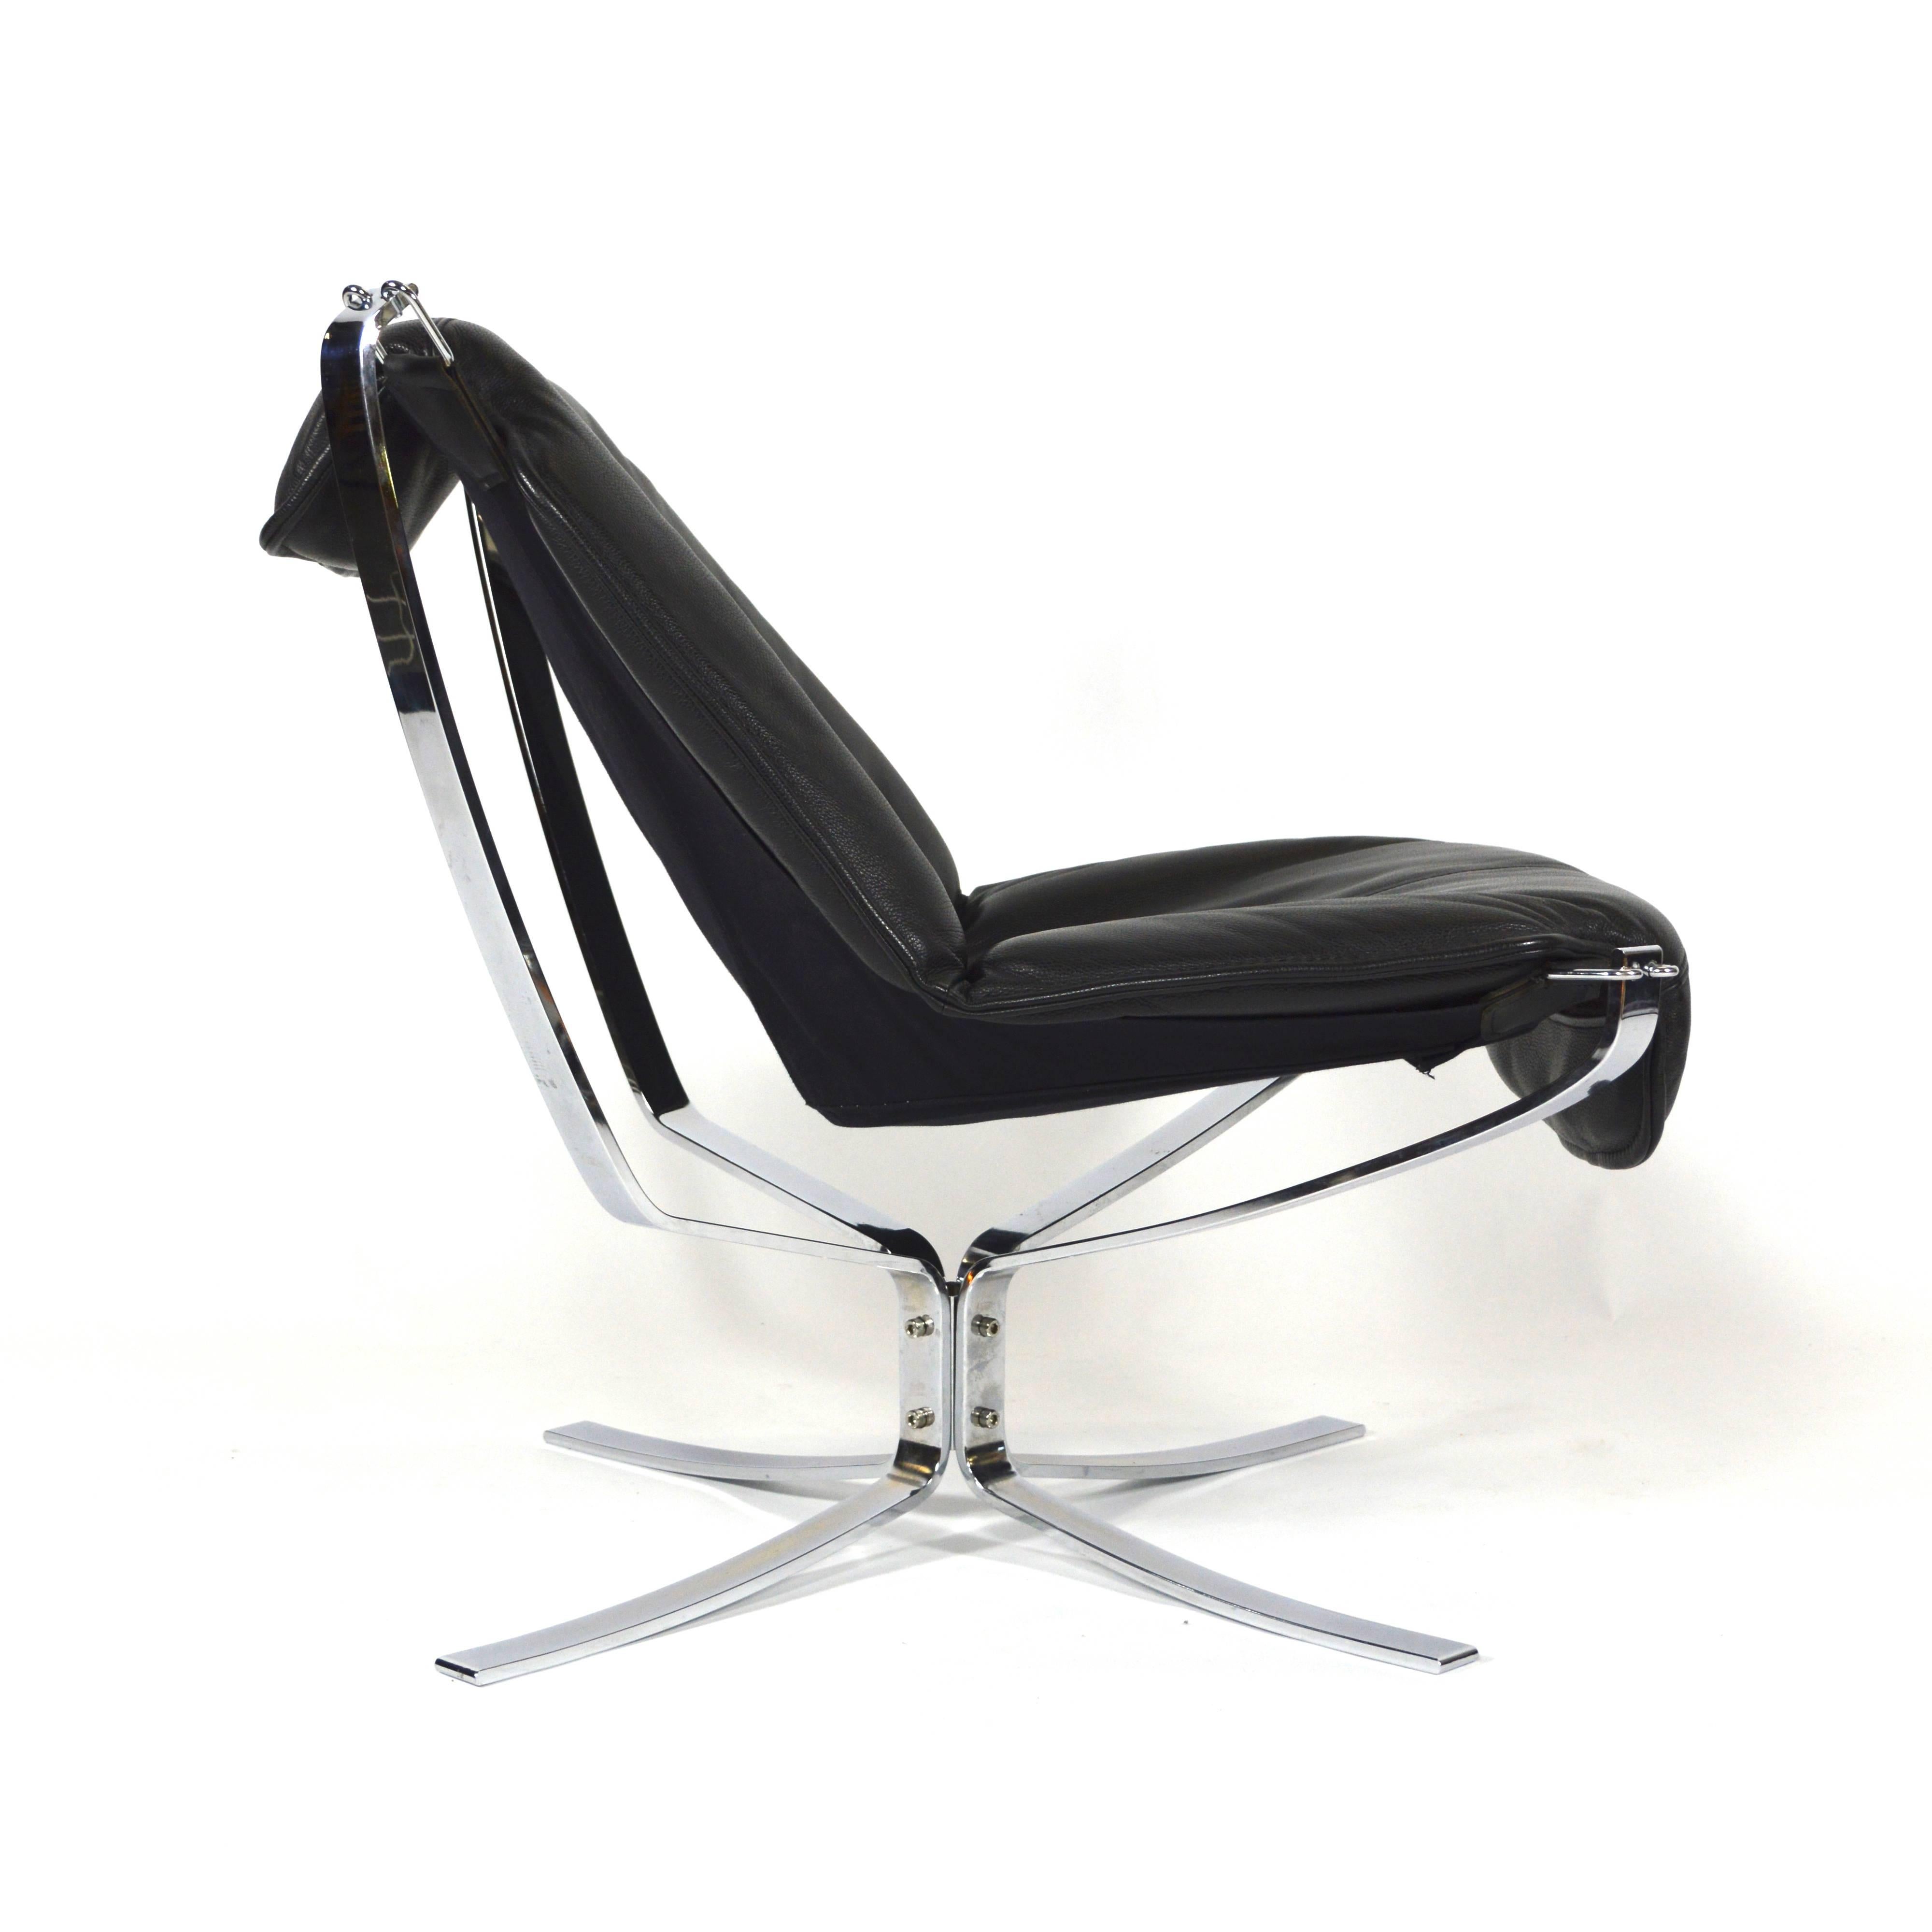 Stunning Falcon chair by Sigurd Resell.
Chromed base with black leather cushion supported by hammock style canvas.
The chair sits very comfortable.
In excellent condition.